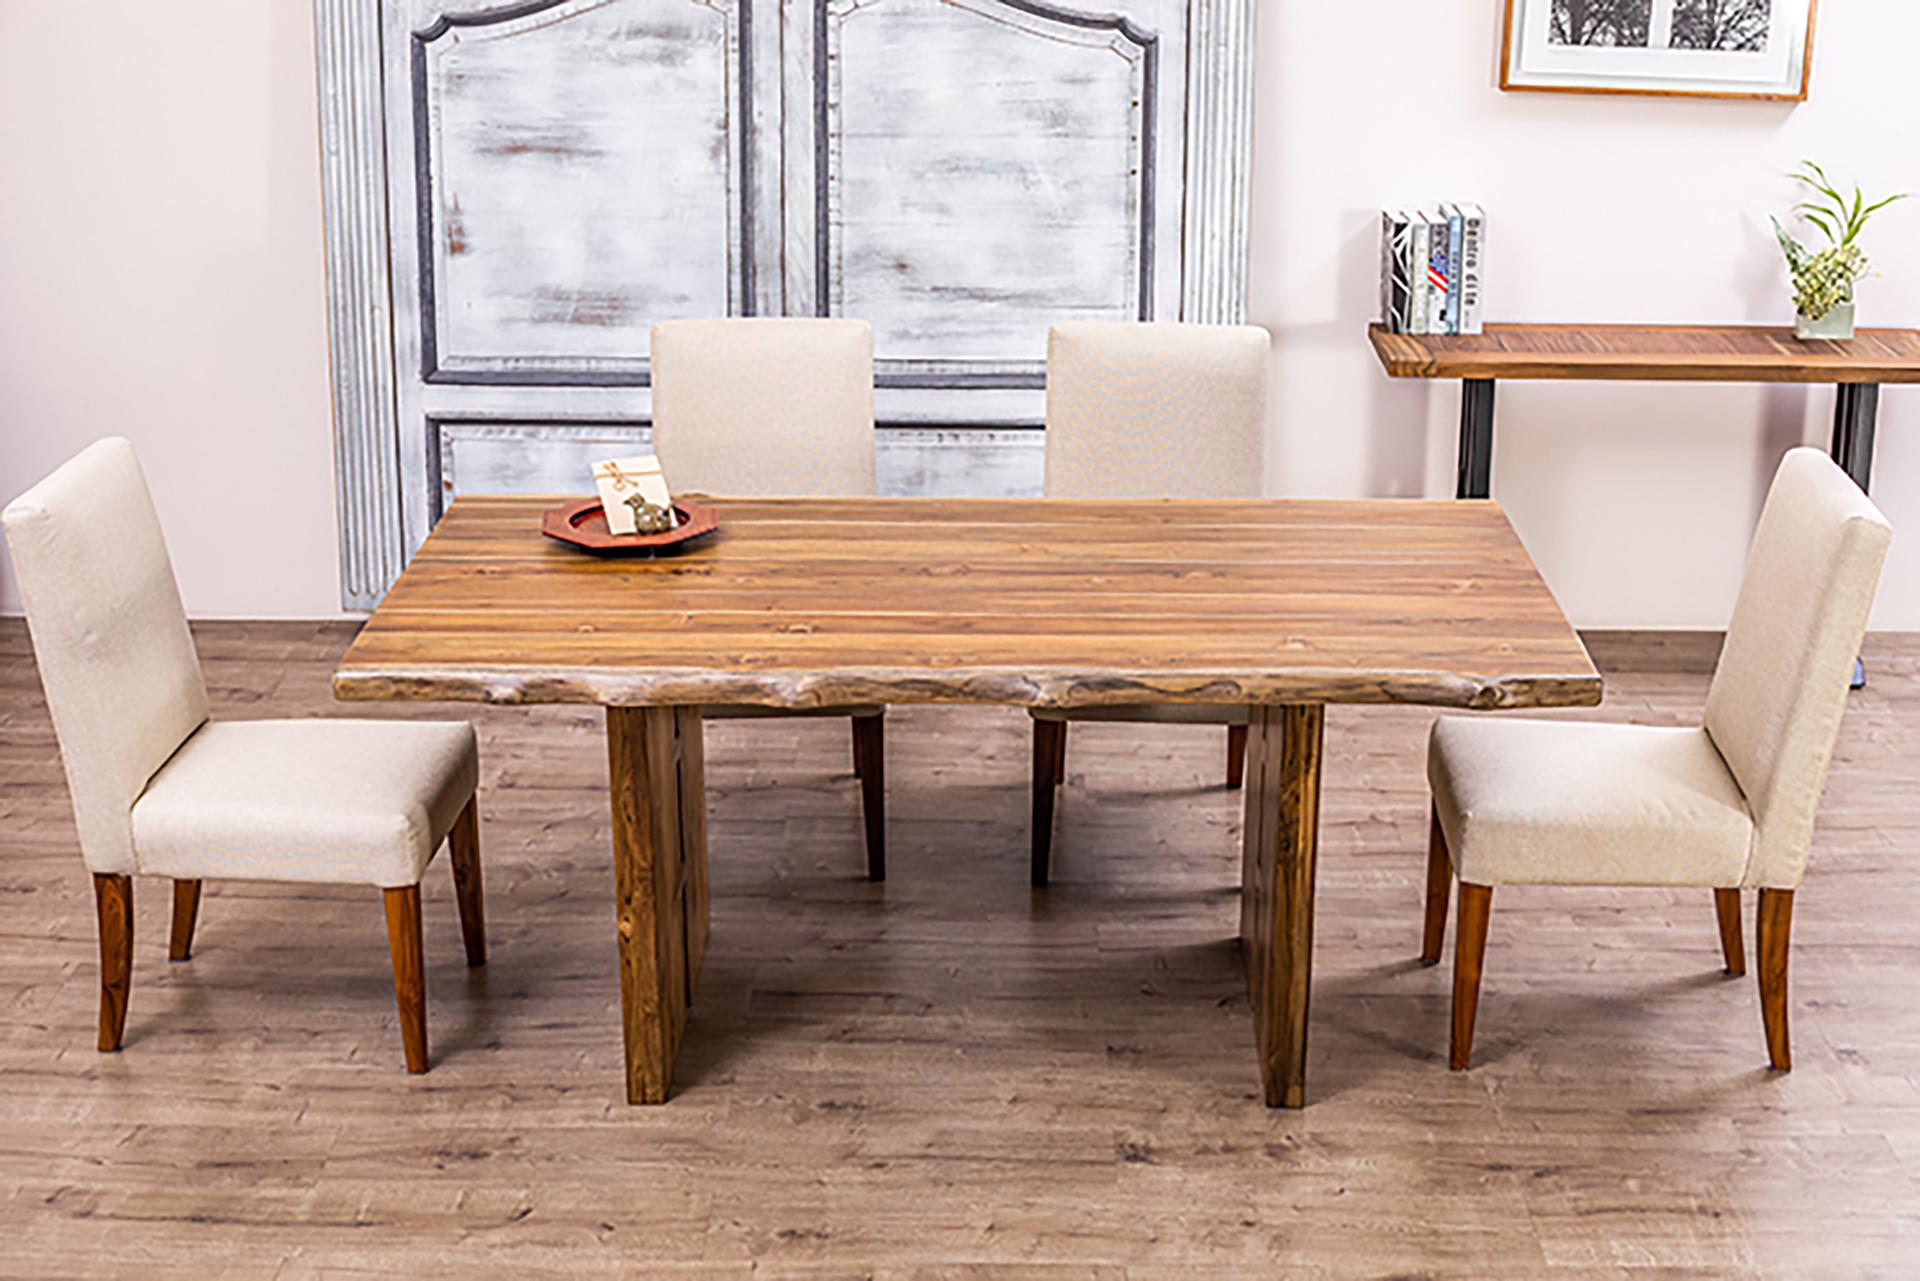 A gorgeous dining table that provides a lovely foundation for family dinners. Using century-old joinery techniques, the 100% solid natural wood table provides a focal piece that can be handed down for generations.
CONTACT US FOR A FREE COLOR SAMPLE